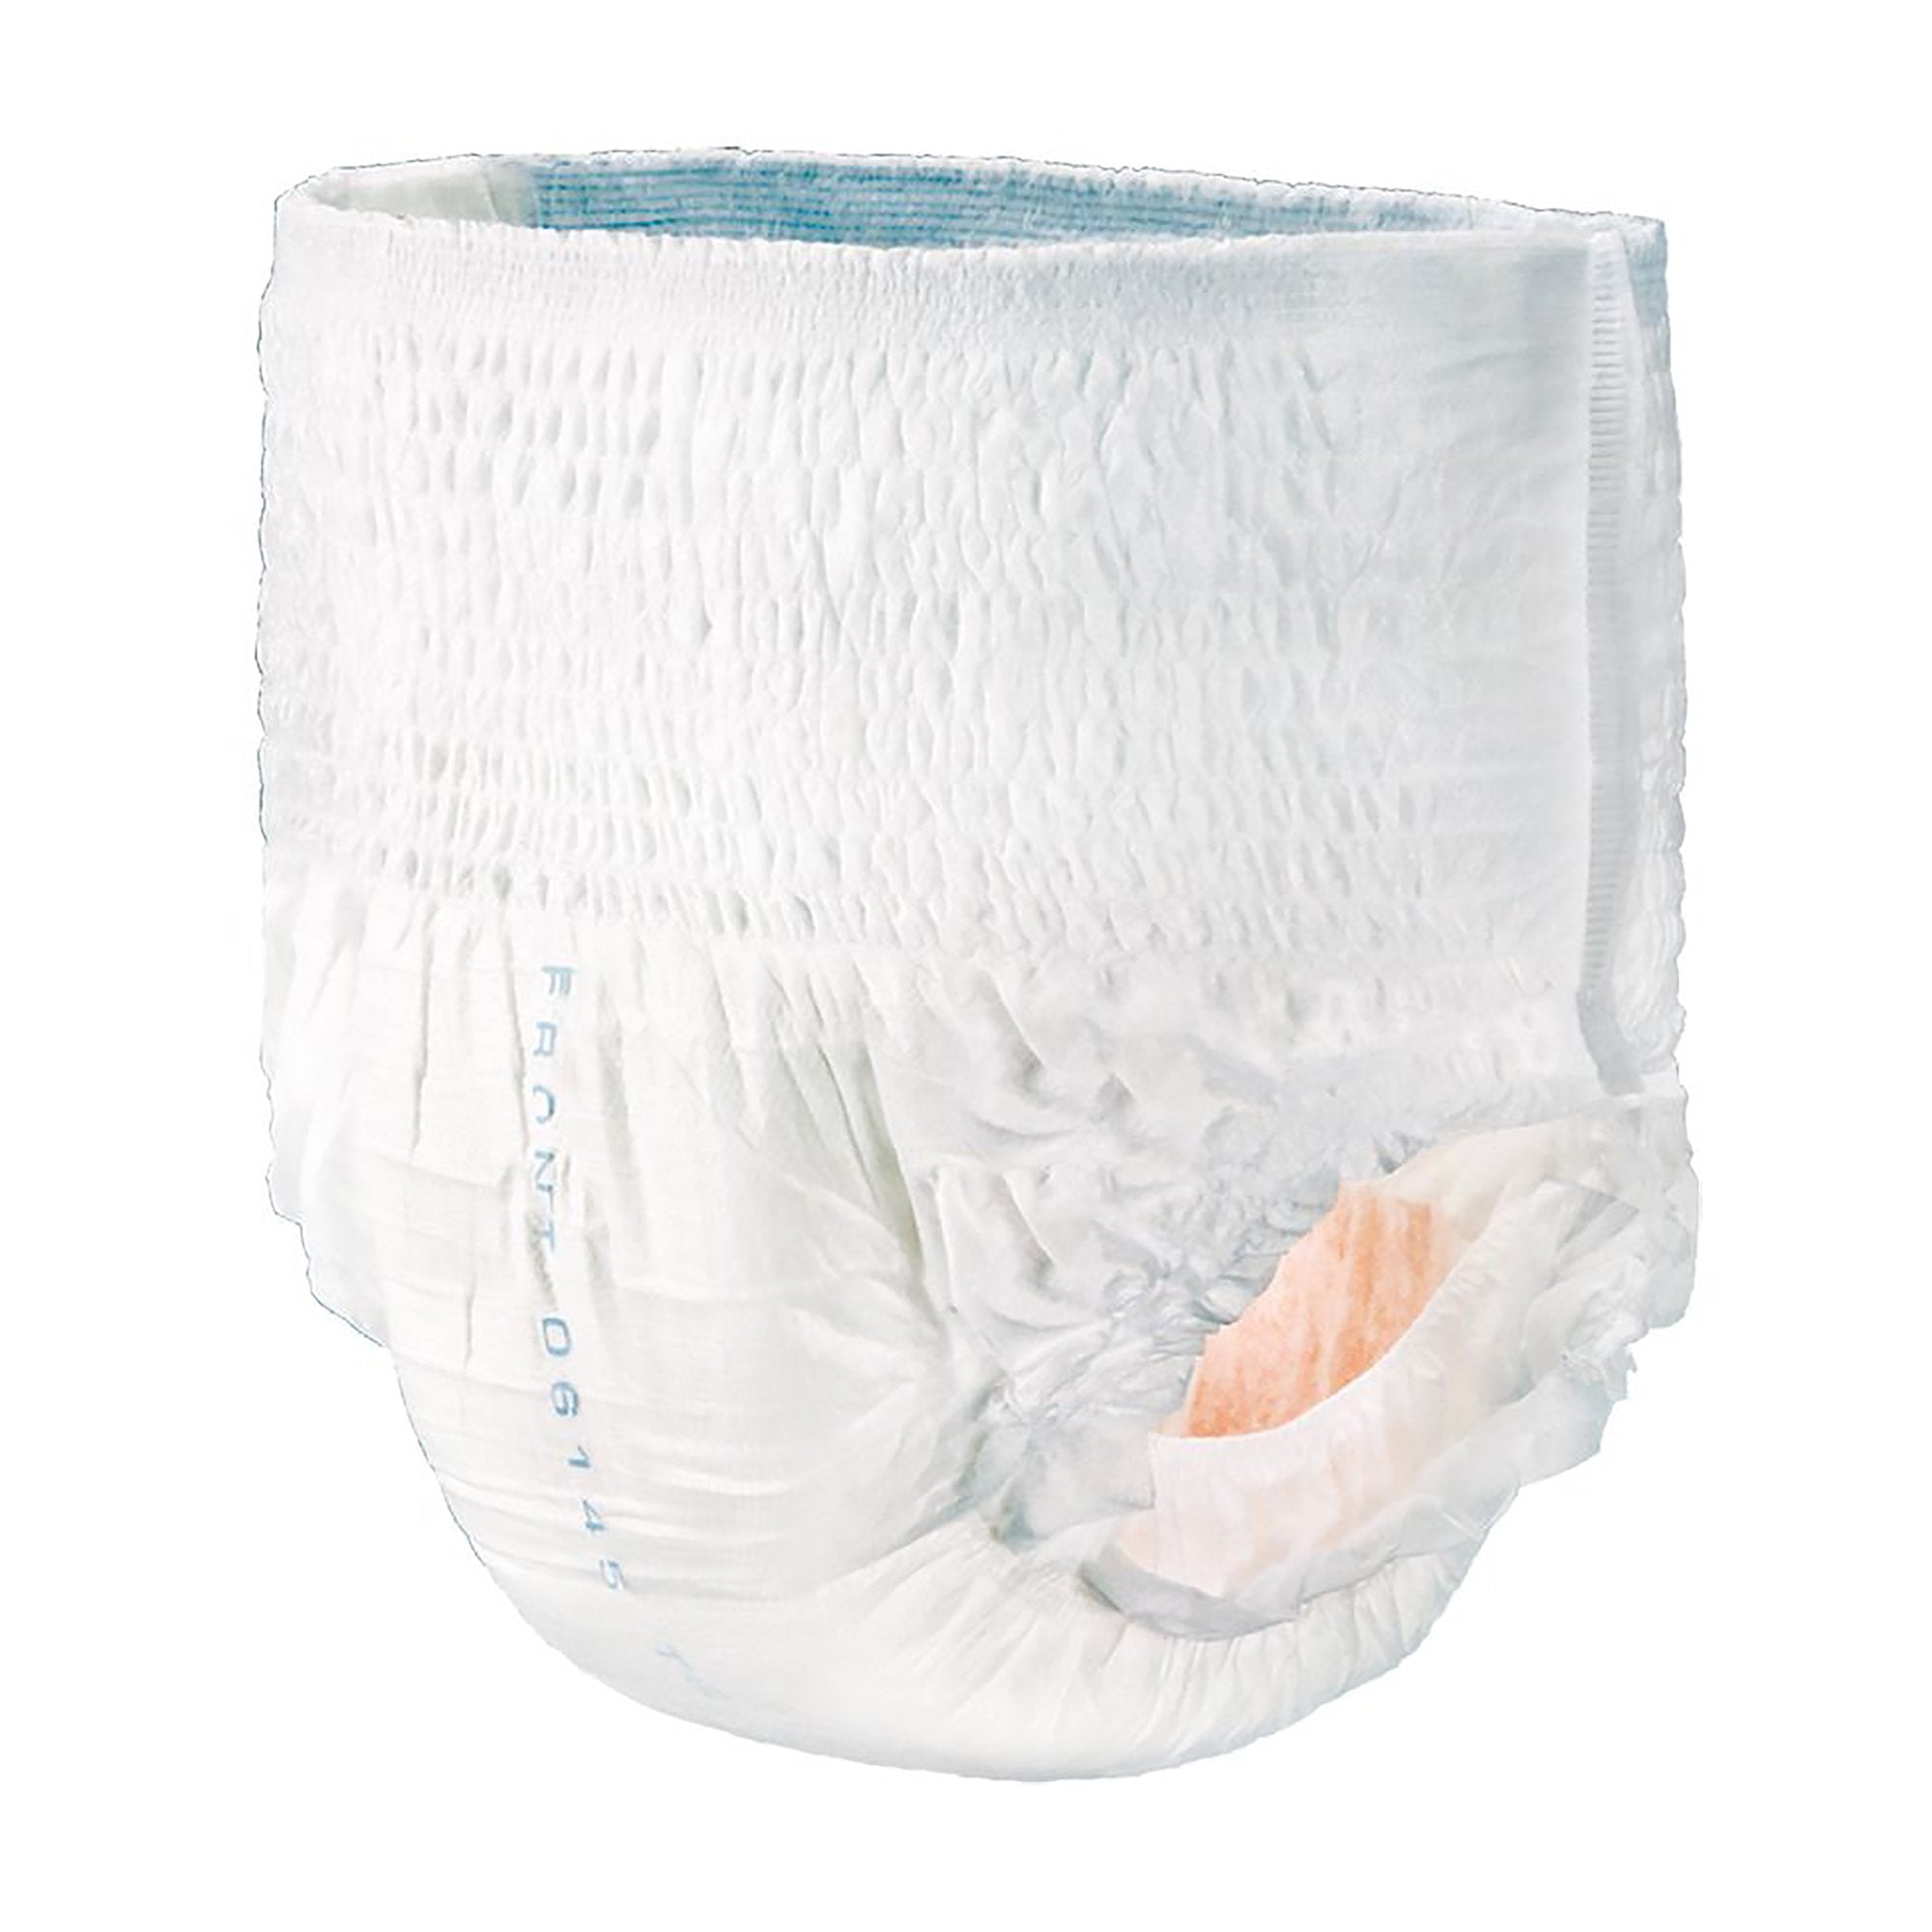 Tranquility? Premium OverNight? Maximum Protection Absorbent Underwear, Extra Small